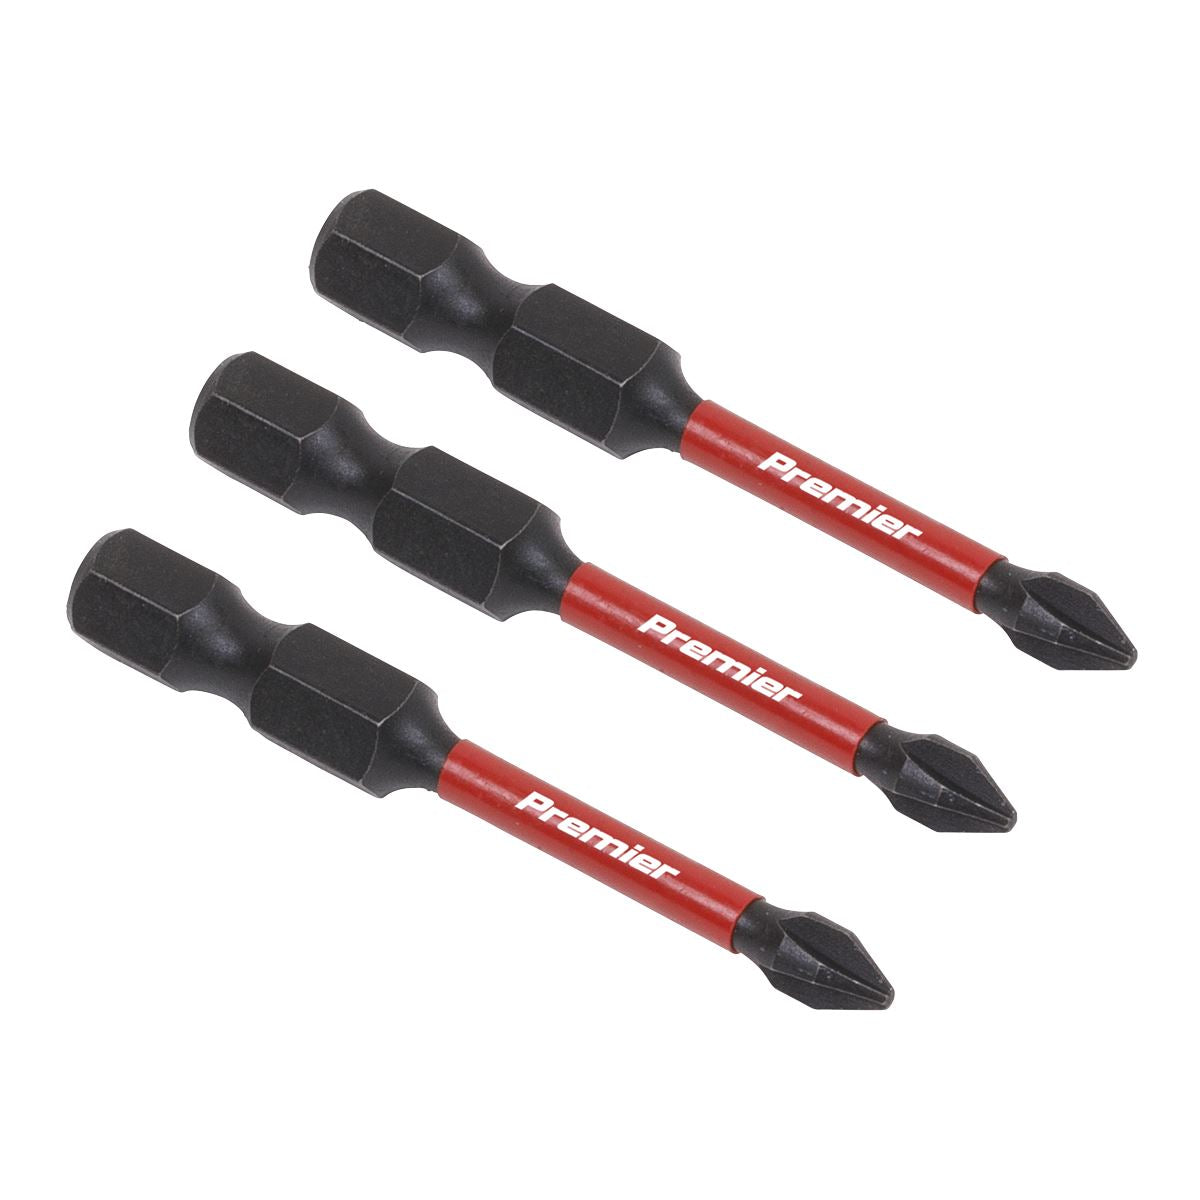 Sealey Premier Phillips #1 Impact Power Tool Bits 50mm - 3pc